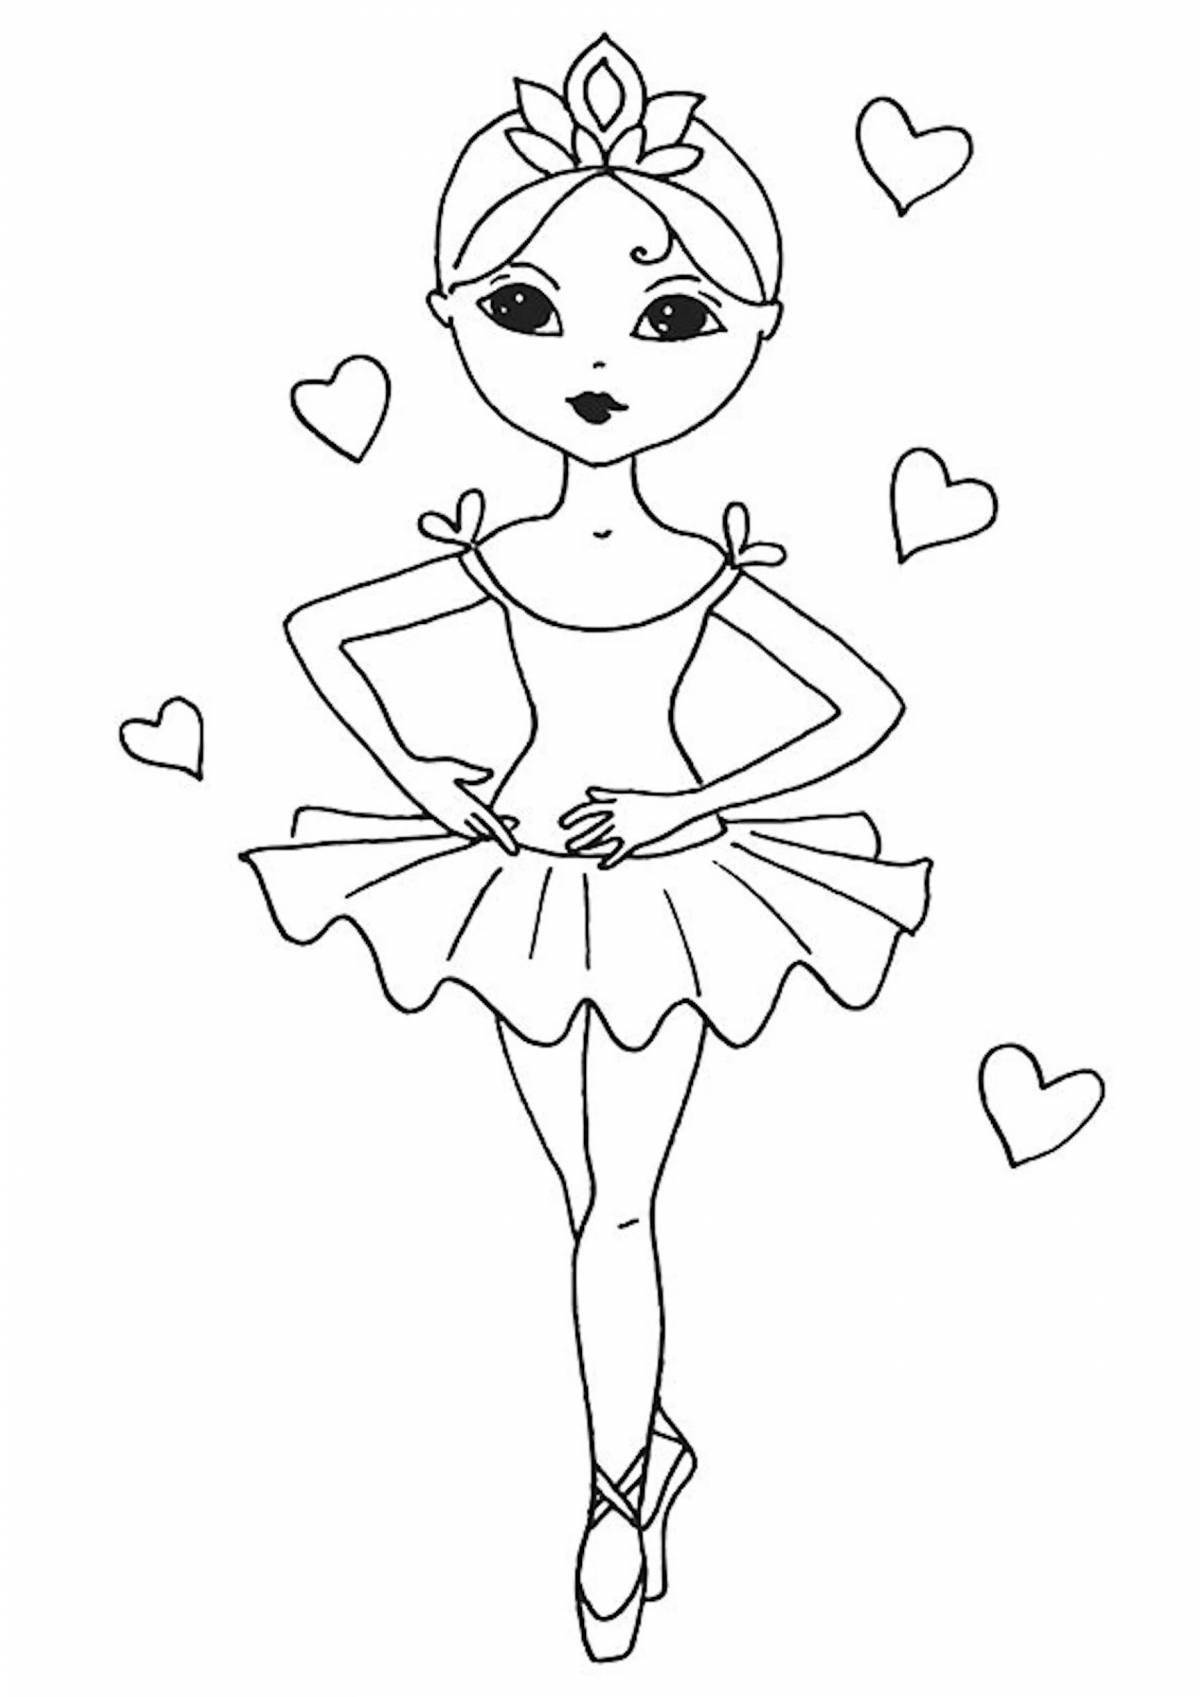 Coloring page nice ballerina